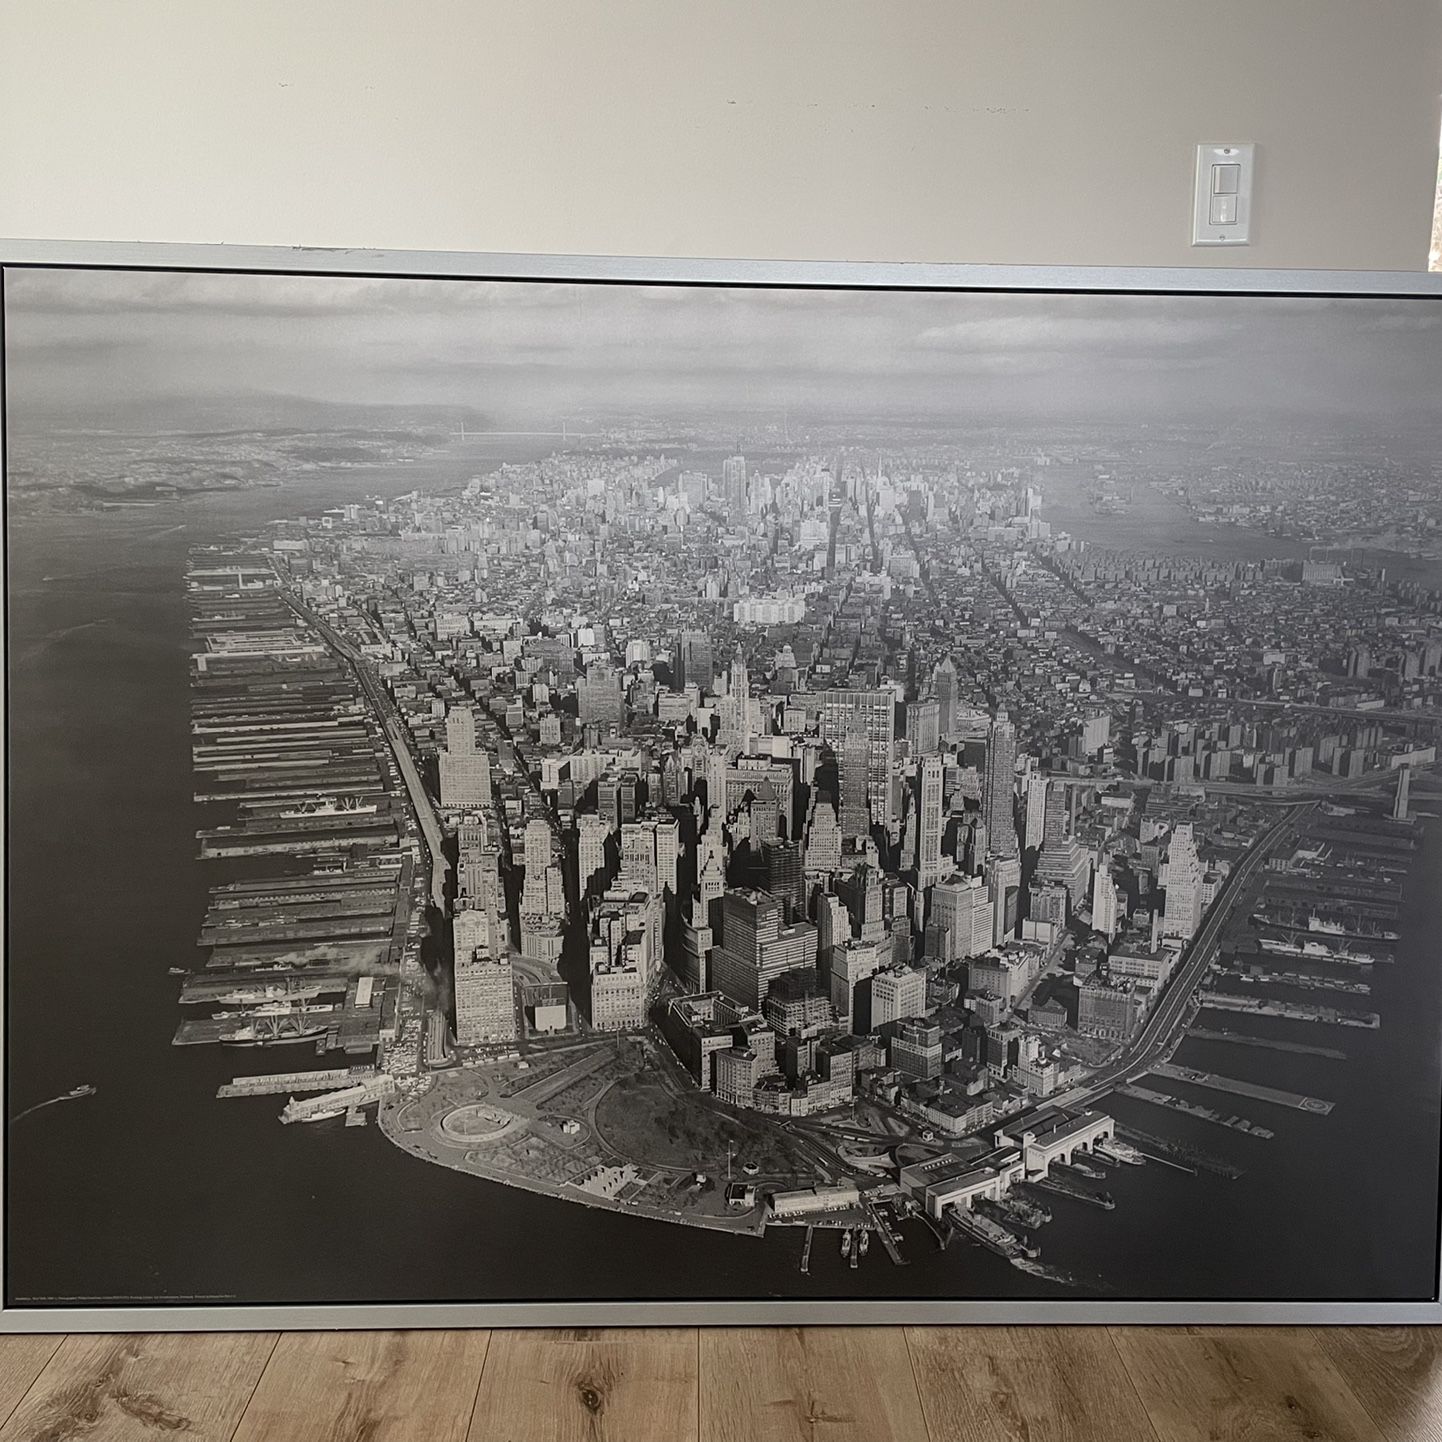 Vilshult New York Printed Canvas Poster for Sale in Los Angeles, CA - OfferUp